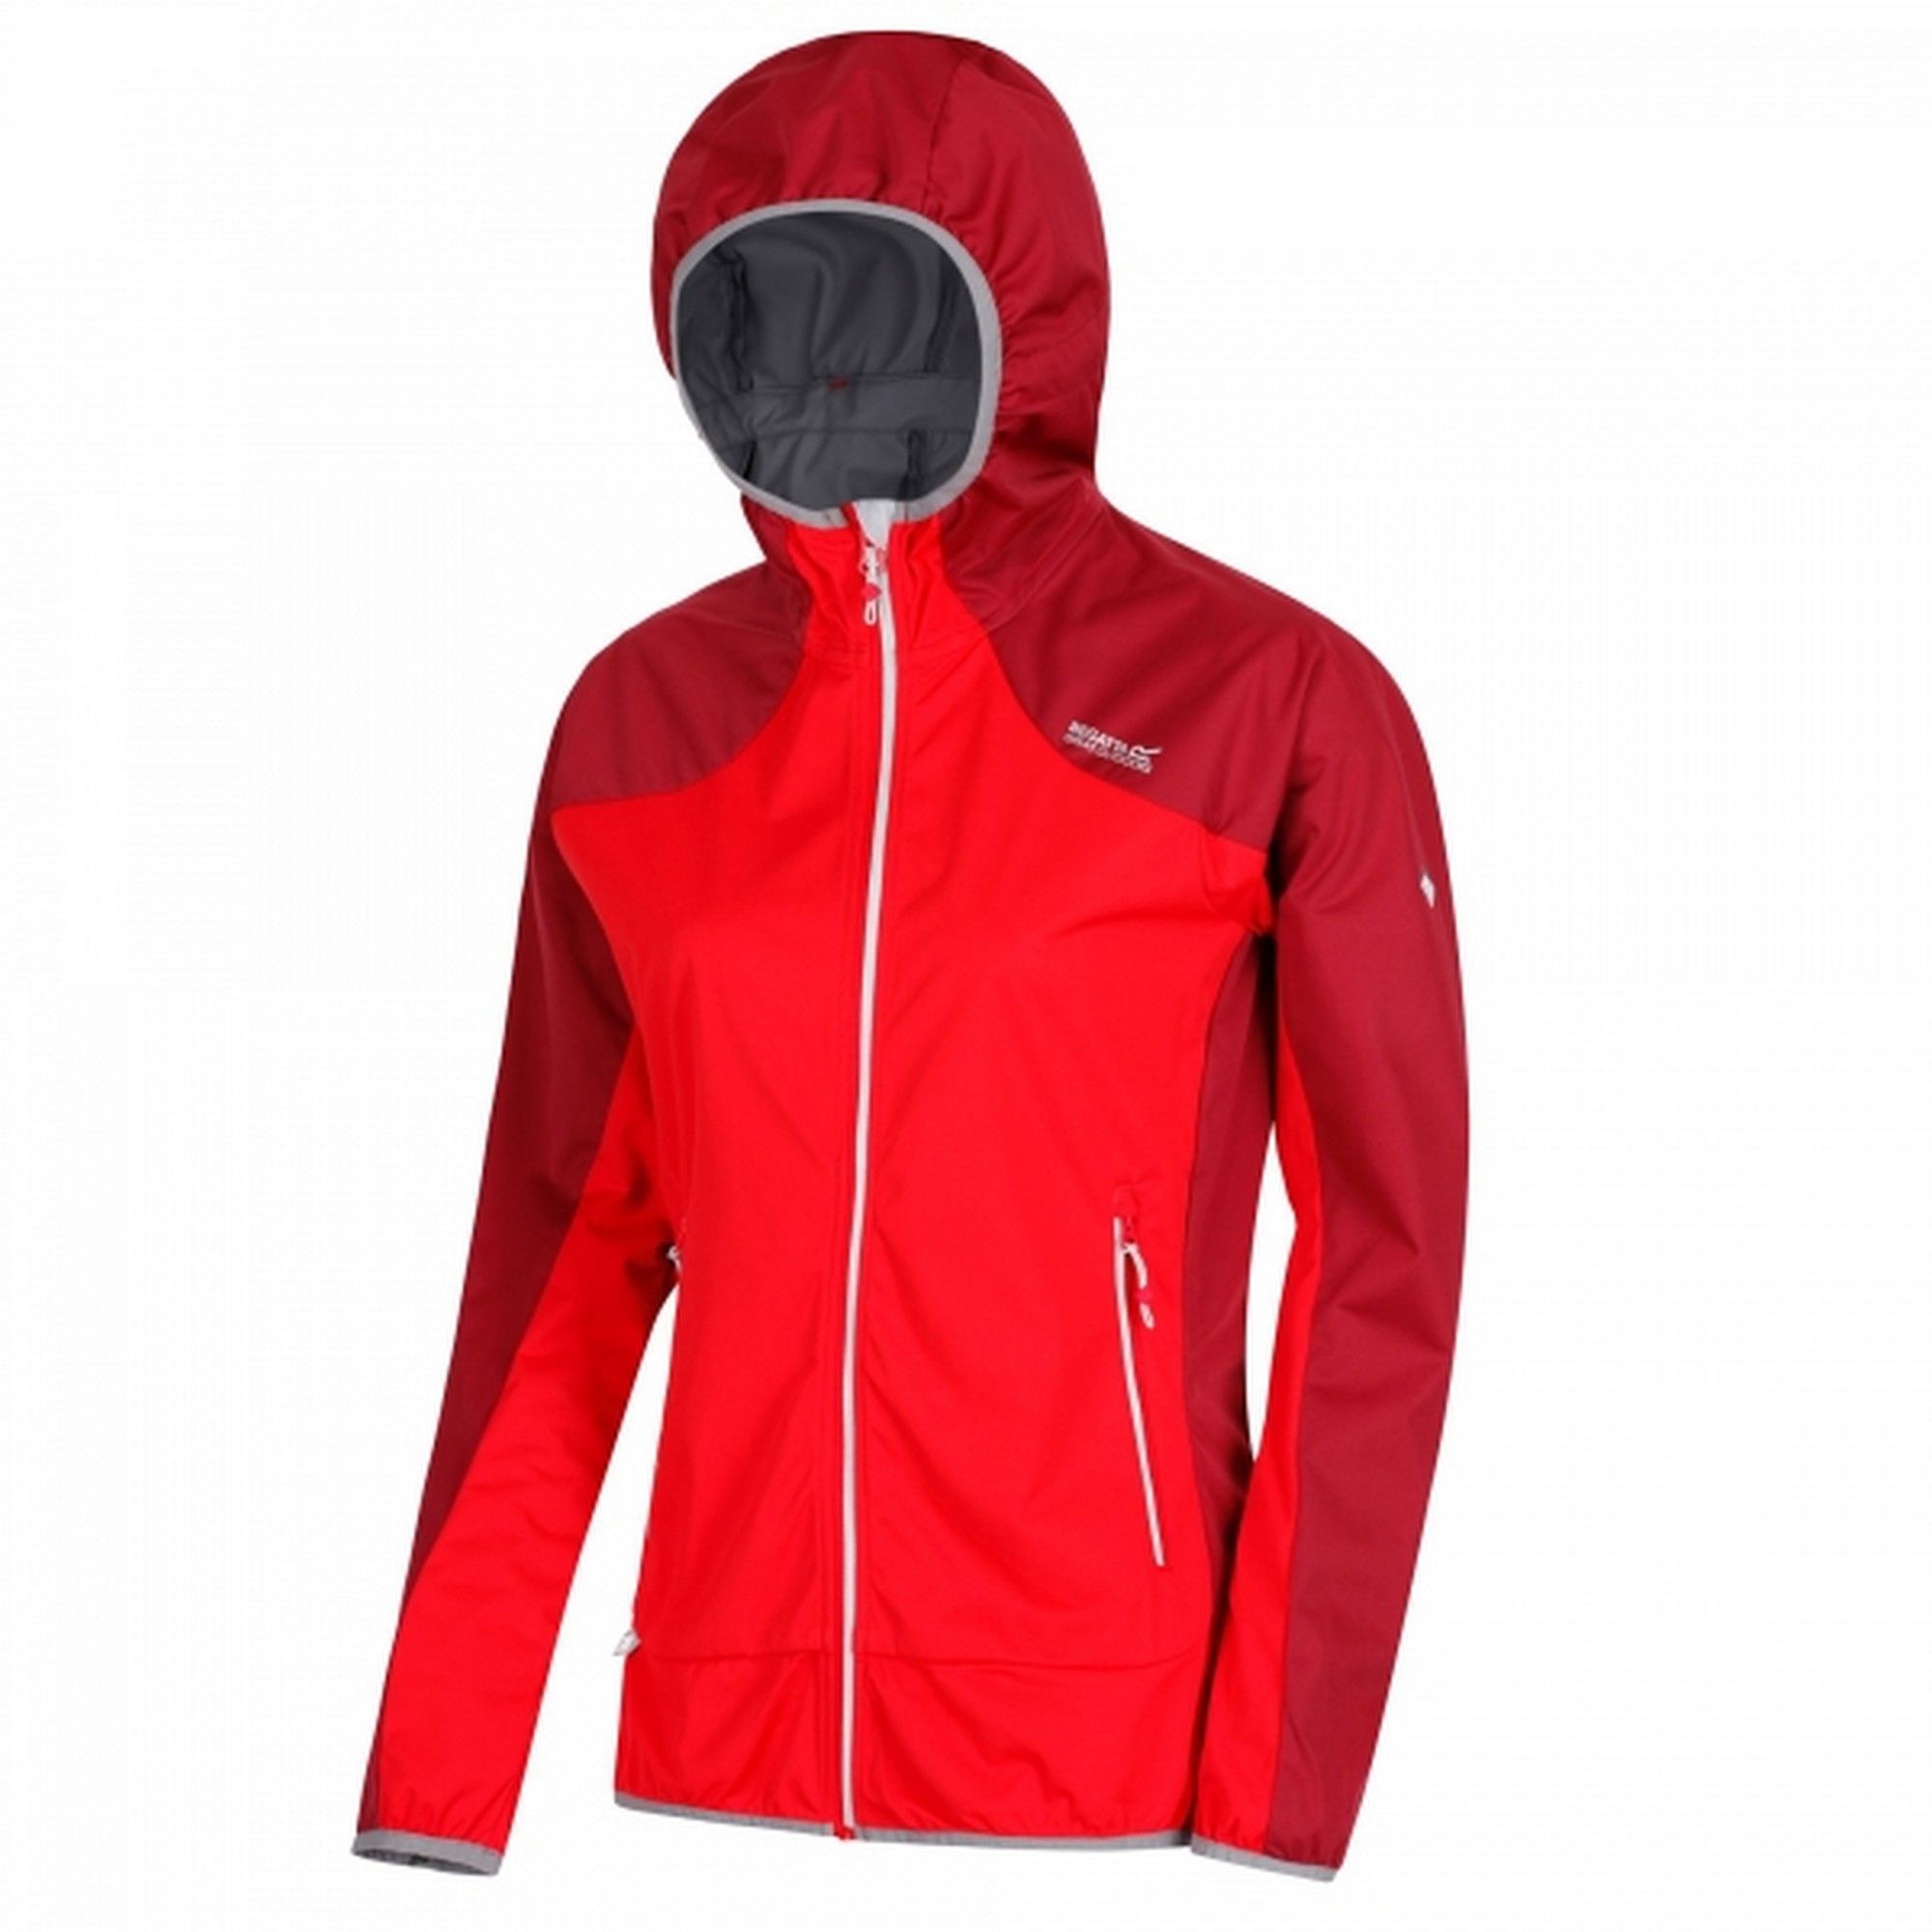 Womens hooded jacket made of wind resistant lightweight Softshell XPT stretch fabric. Durable water repellent finish. Grown on hood. Inner zip guard. Articulated sleeves for enhanced range of movement. 2 zipped lower pockets. Mesh lined pockets for breathability. Stretch binding to hood opening, cuffs, and hem. Ideal for wearing outdoors on a cold day. 100% Polyester.